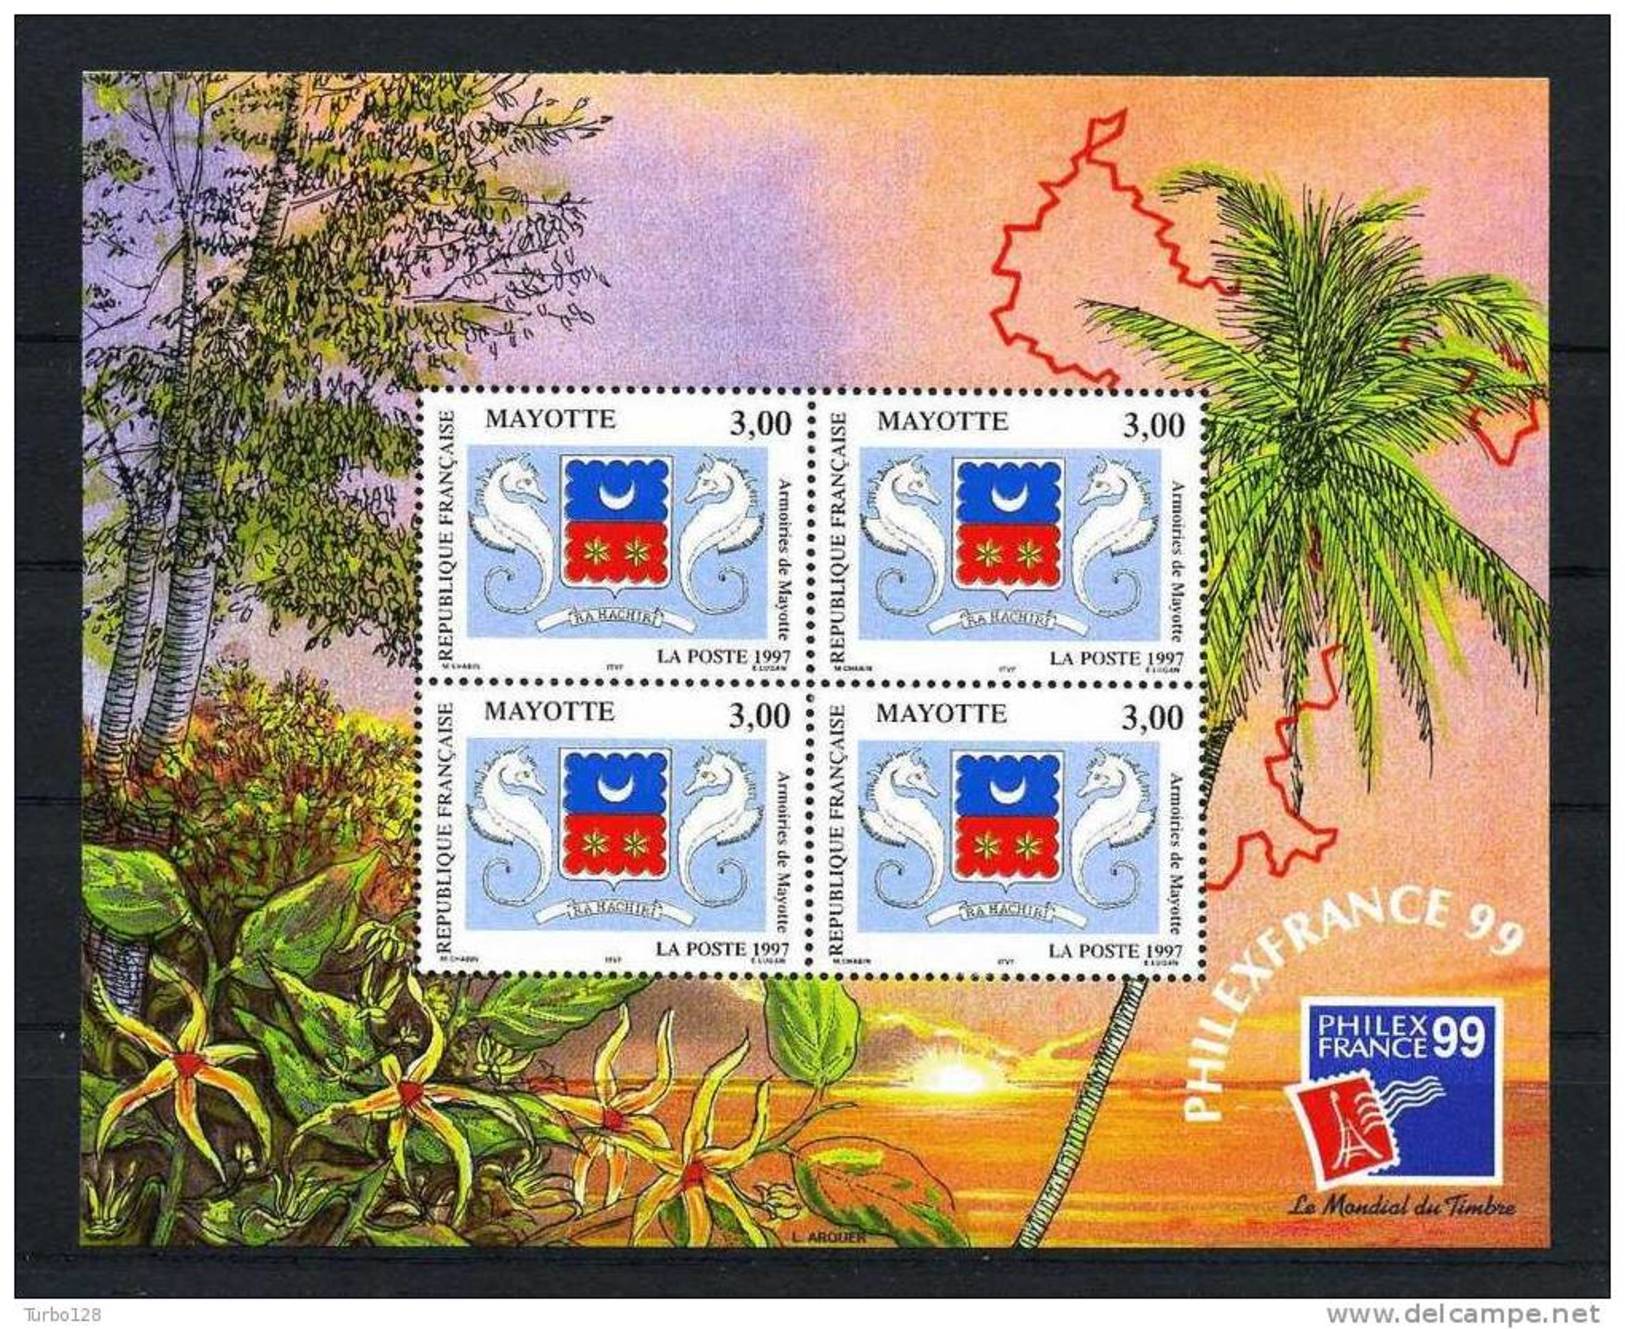 MAYOTTE 1999 Bloc N° 1 **  Neuf MNH Superbe Philexfrance 99 Armoiries Coat Of Arms - Blocs-feuillets